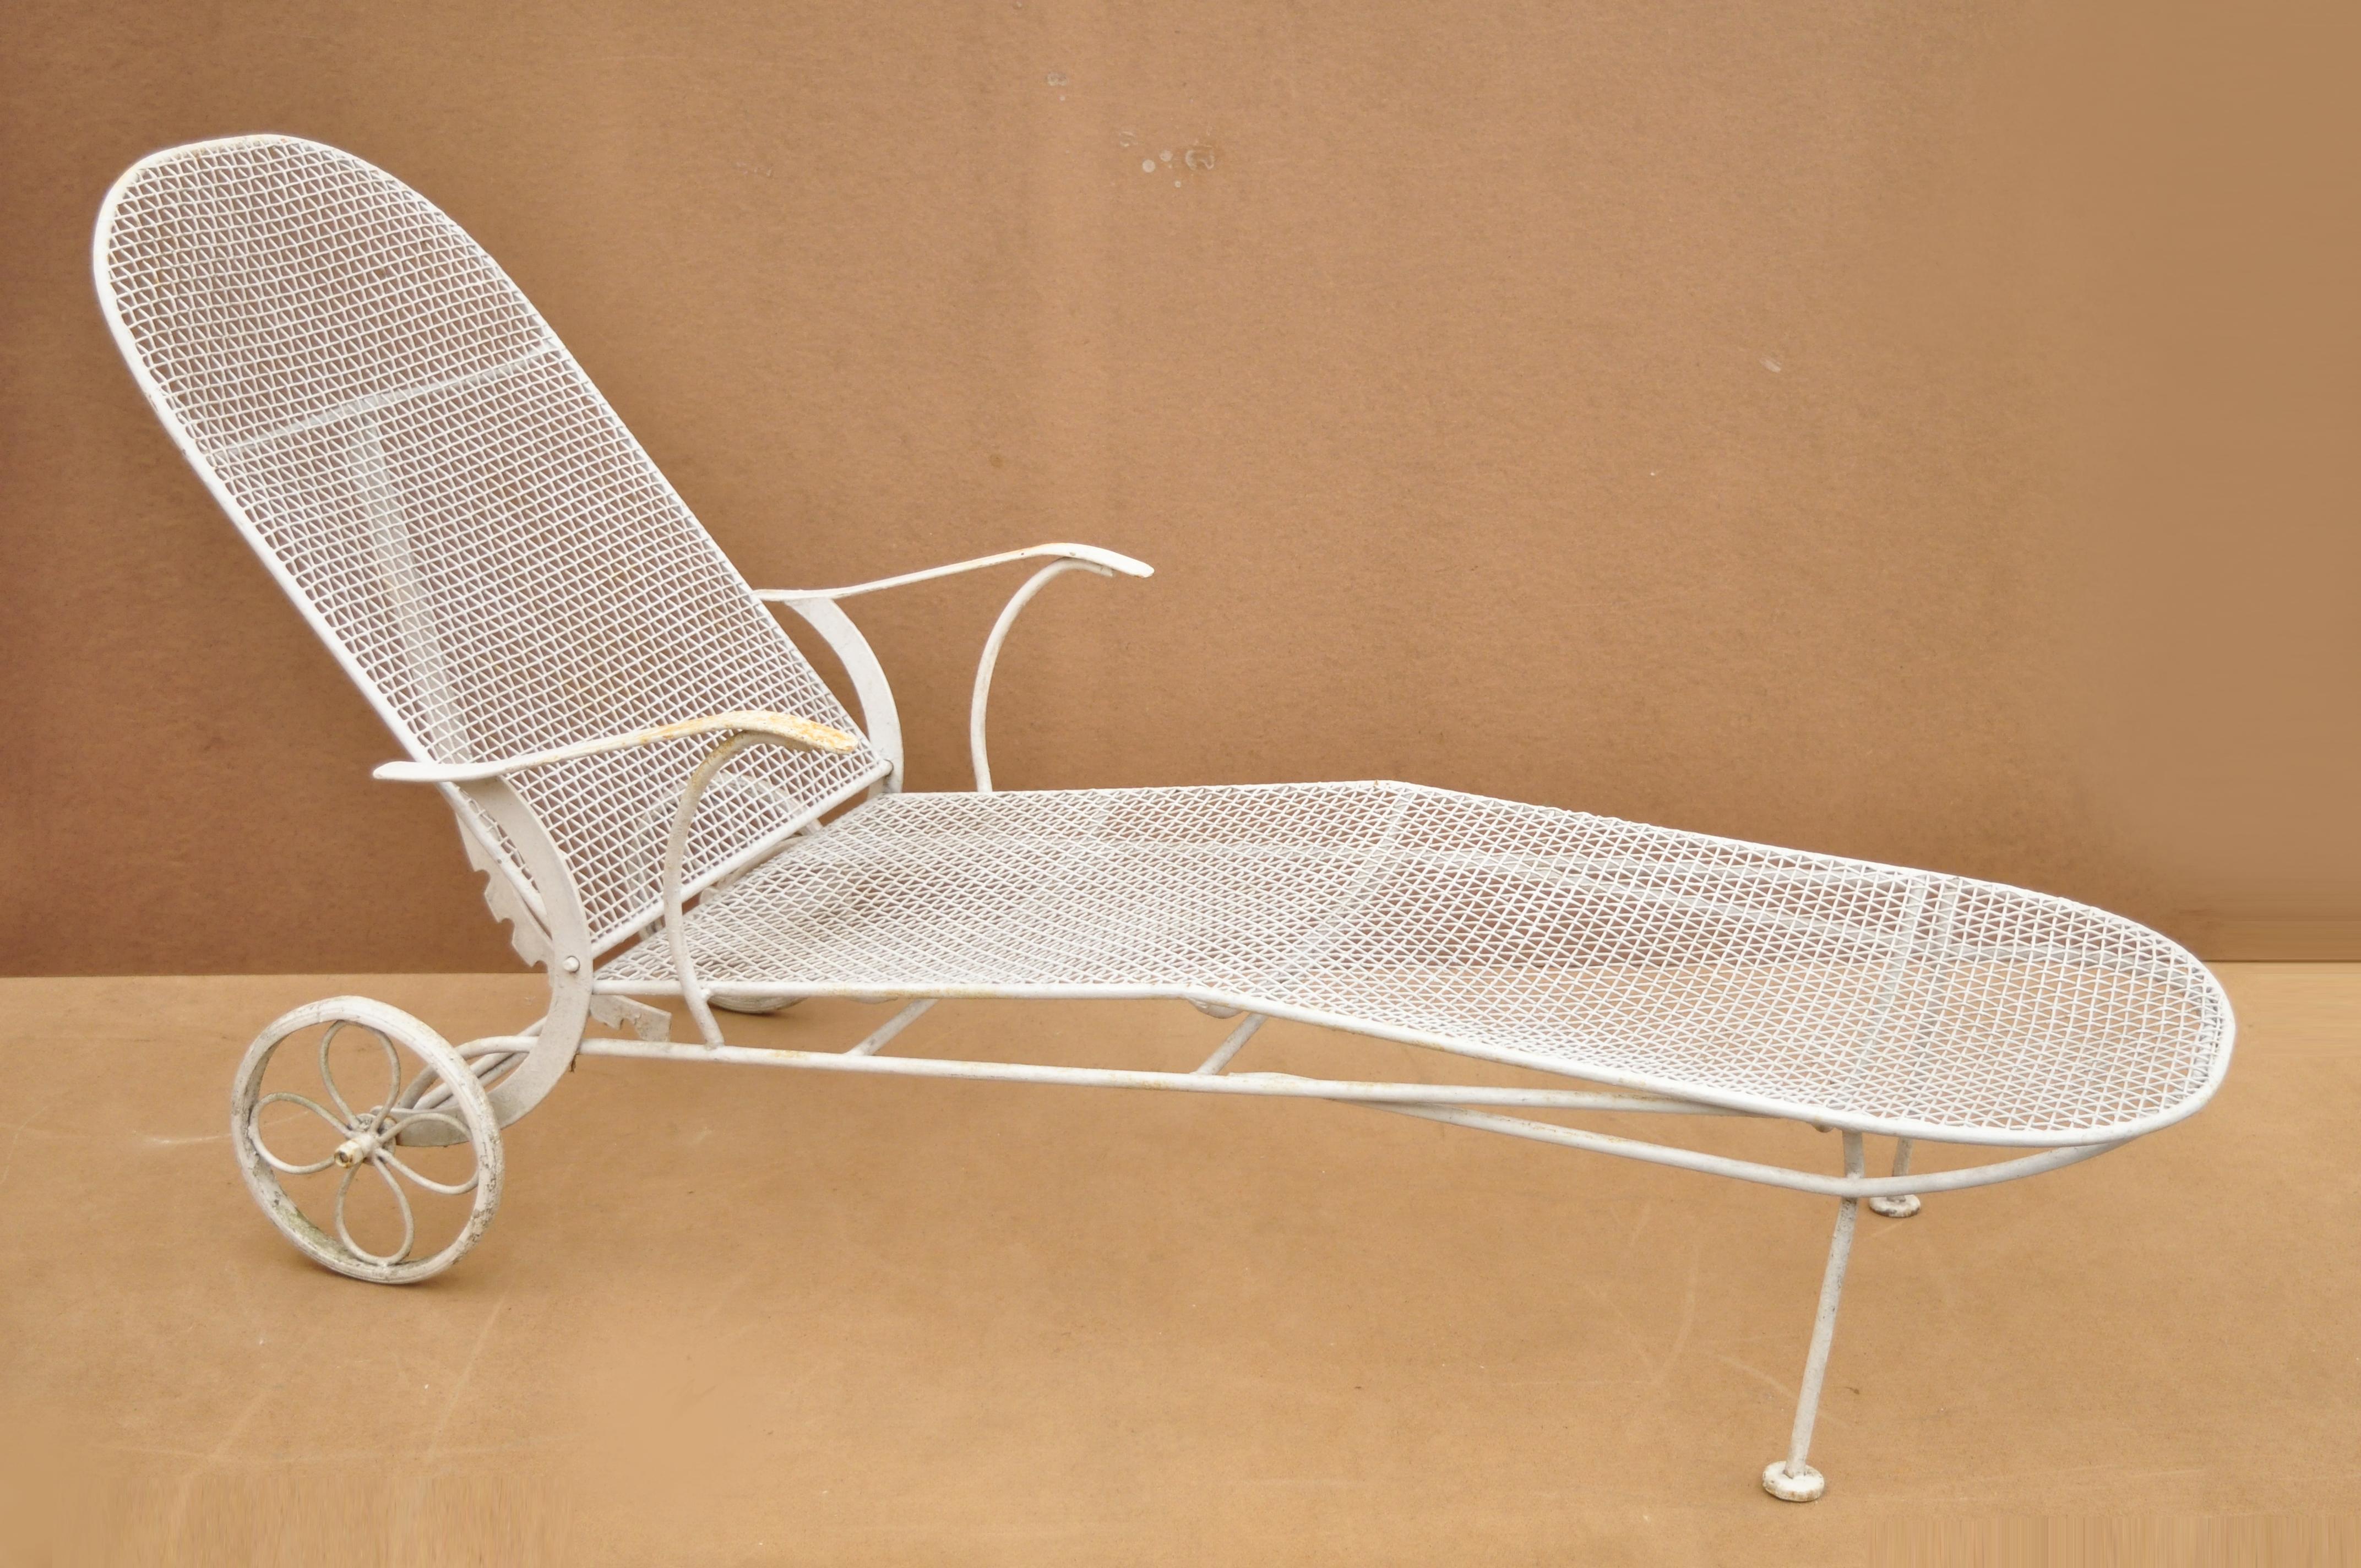 Vintage Russell Woodard sculptura metal mesh wrought iron chaise lounge chair. Item features iron frame, metal mesh seats, iconic Mid-Century Modern design, very nice vintage item, circa 1950. Measurements: 34